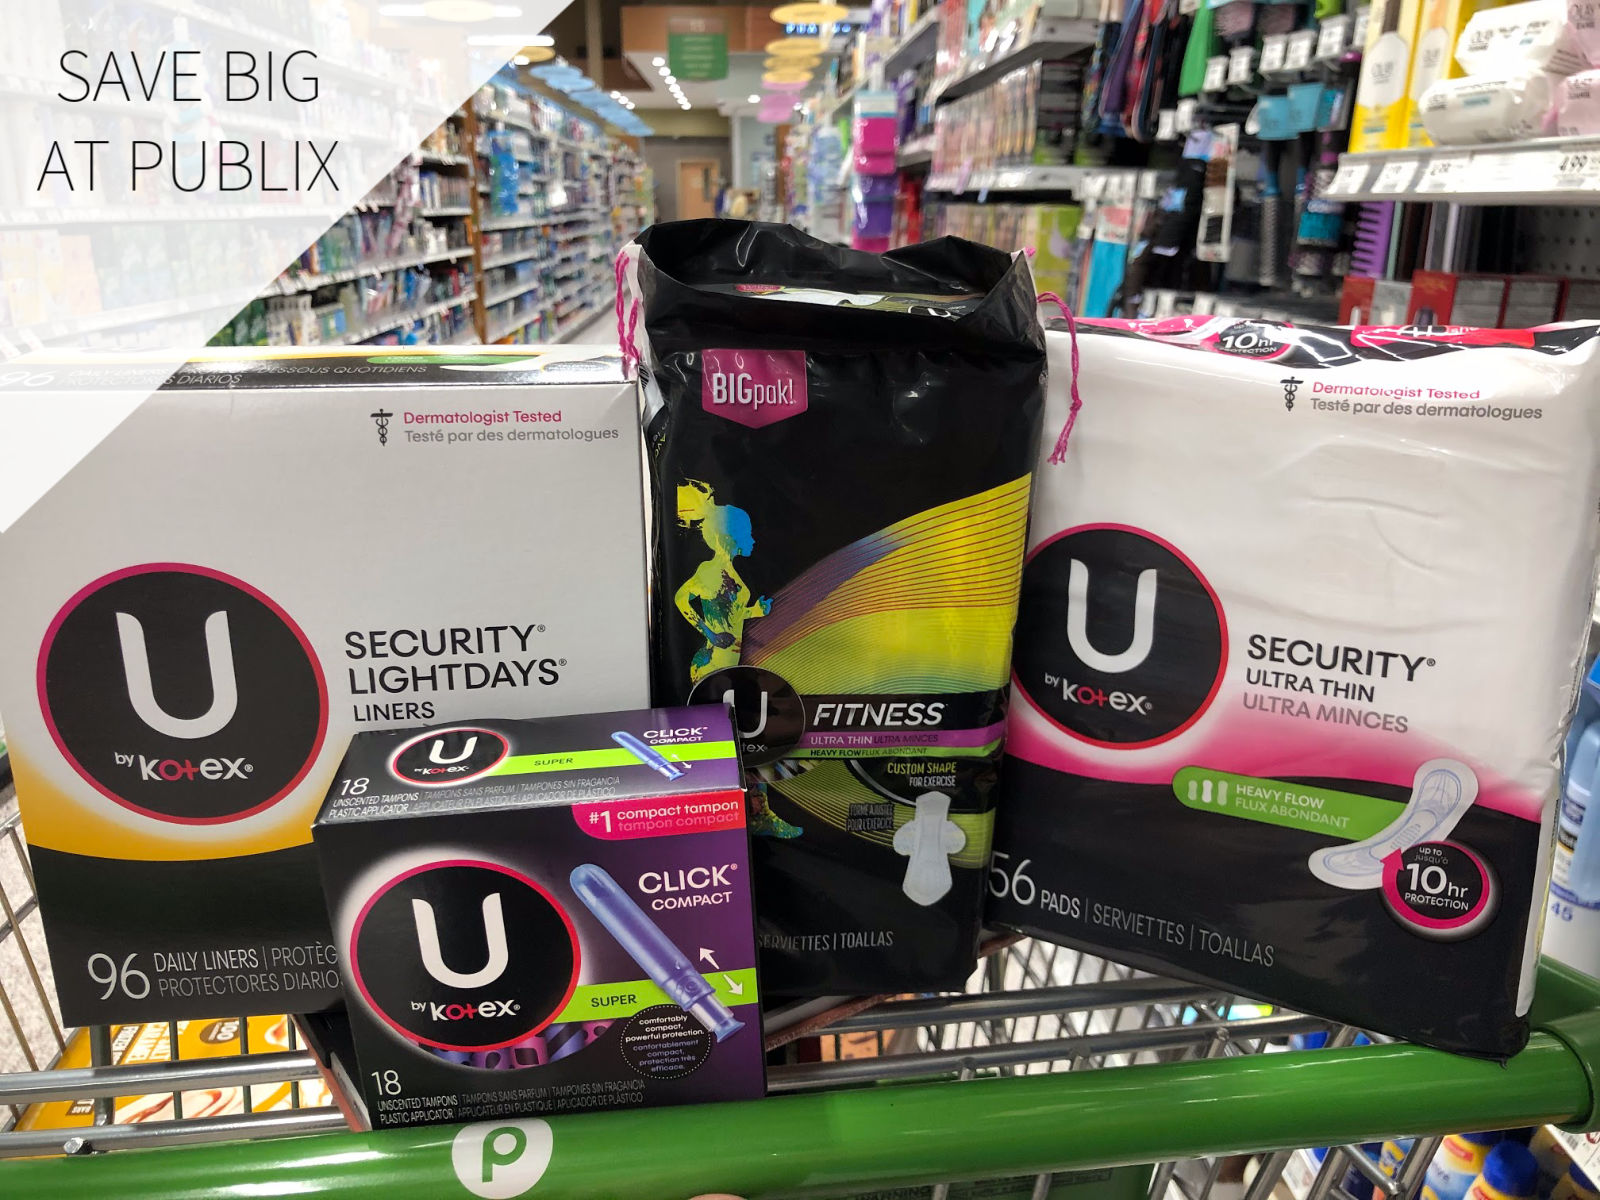 Amazing Deals On U by Kotex Products Available At Publix Through 11/1 on I Heart Publix 1